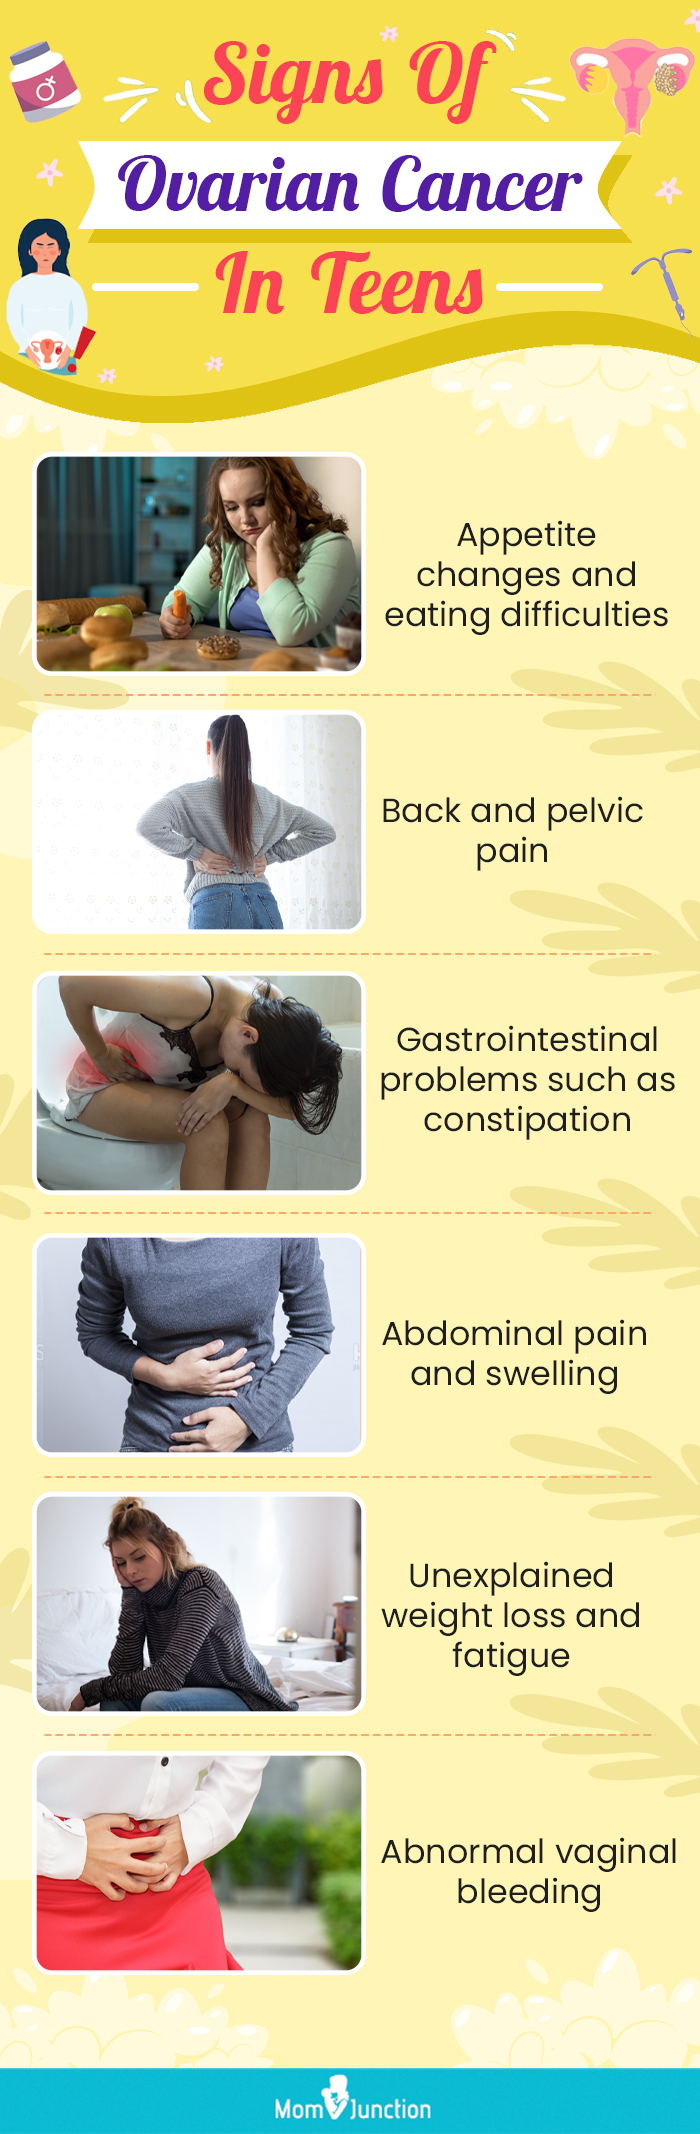 signs of ovarian cancer in teens (infographic)